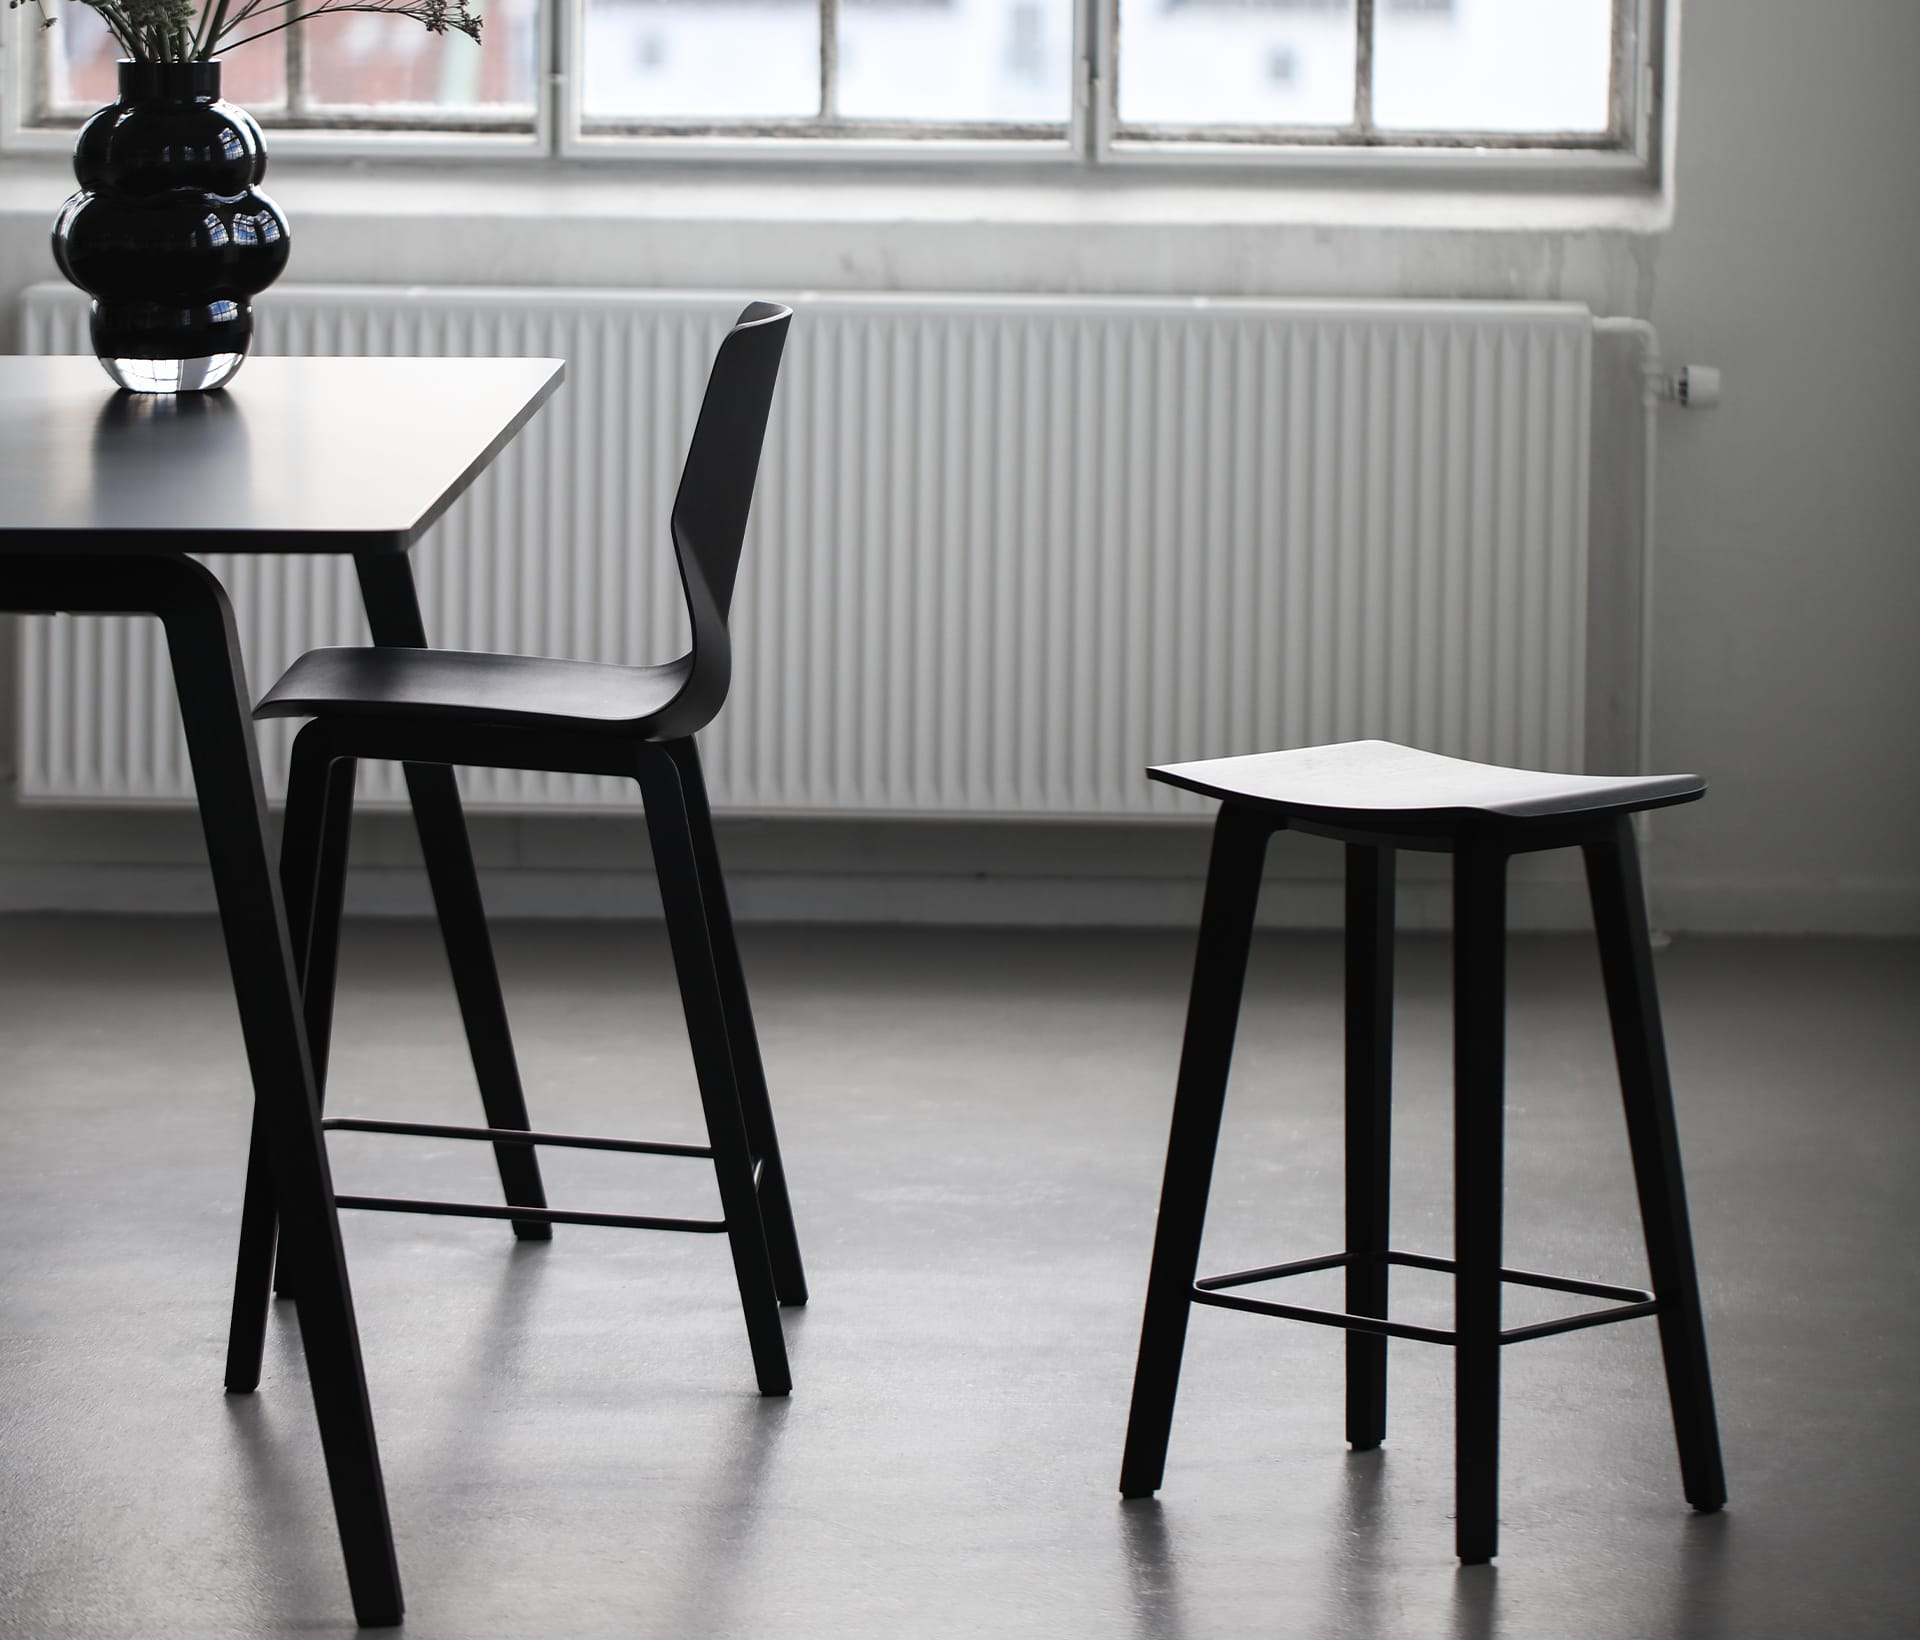 A dining table with two black counter height chairs and a stool in front of a window.